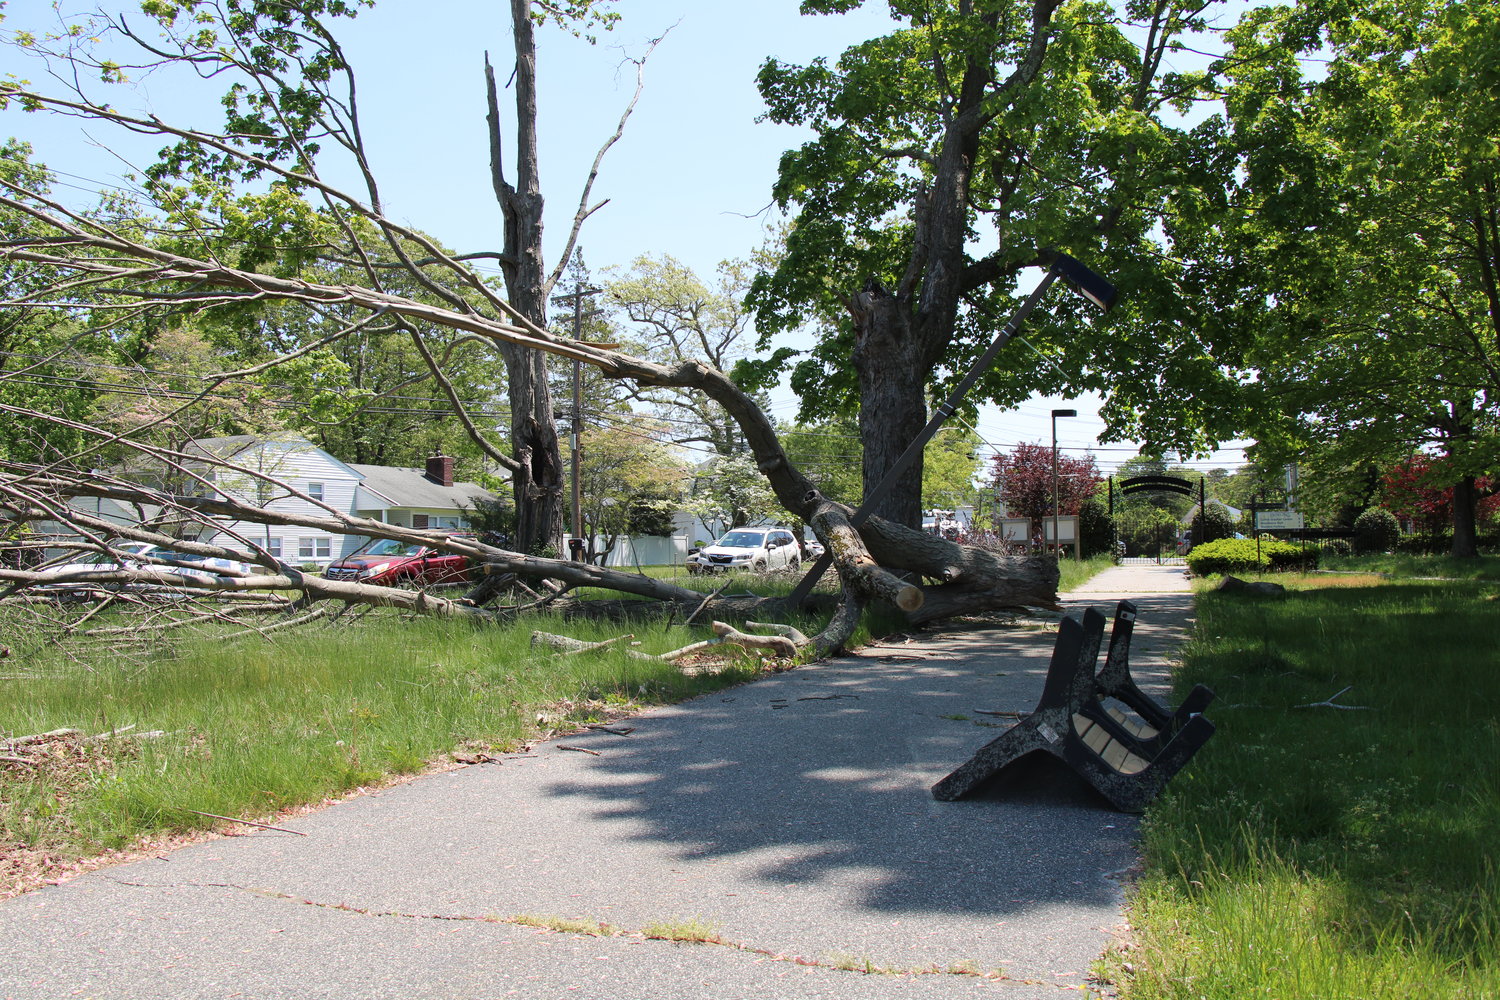 Downed trees are littered throughout the property, with residents having to use their own chainsaws and labor to clear out some of the bigger branches that have fallen.